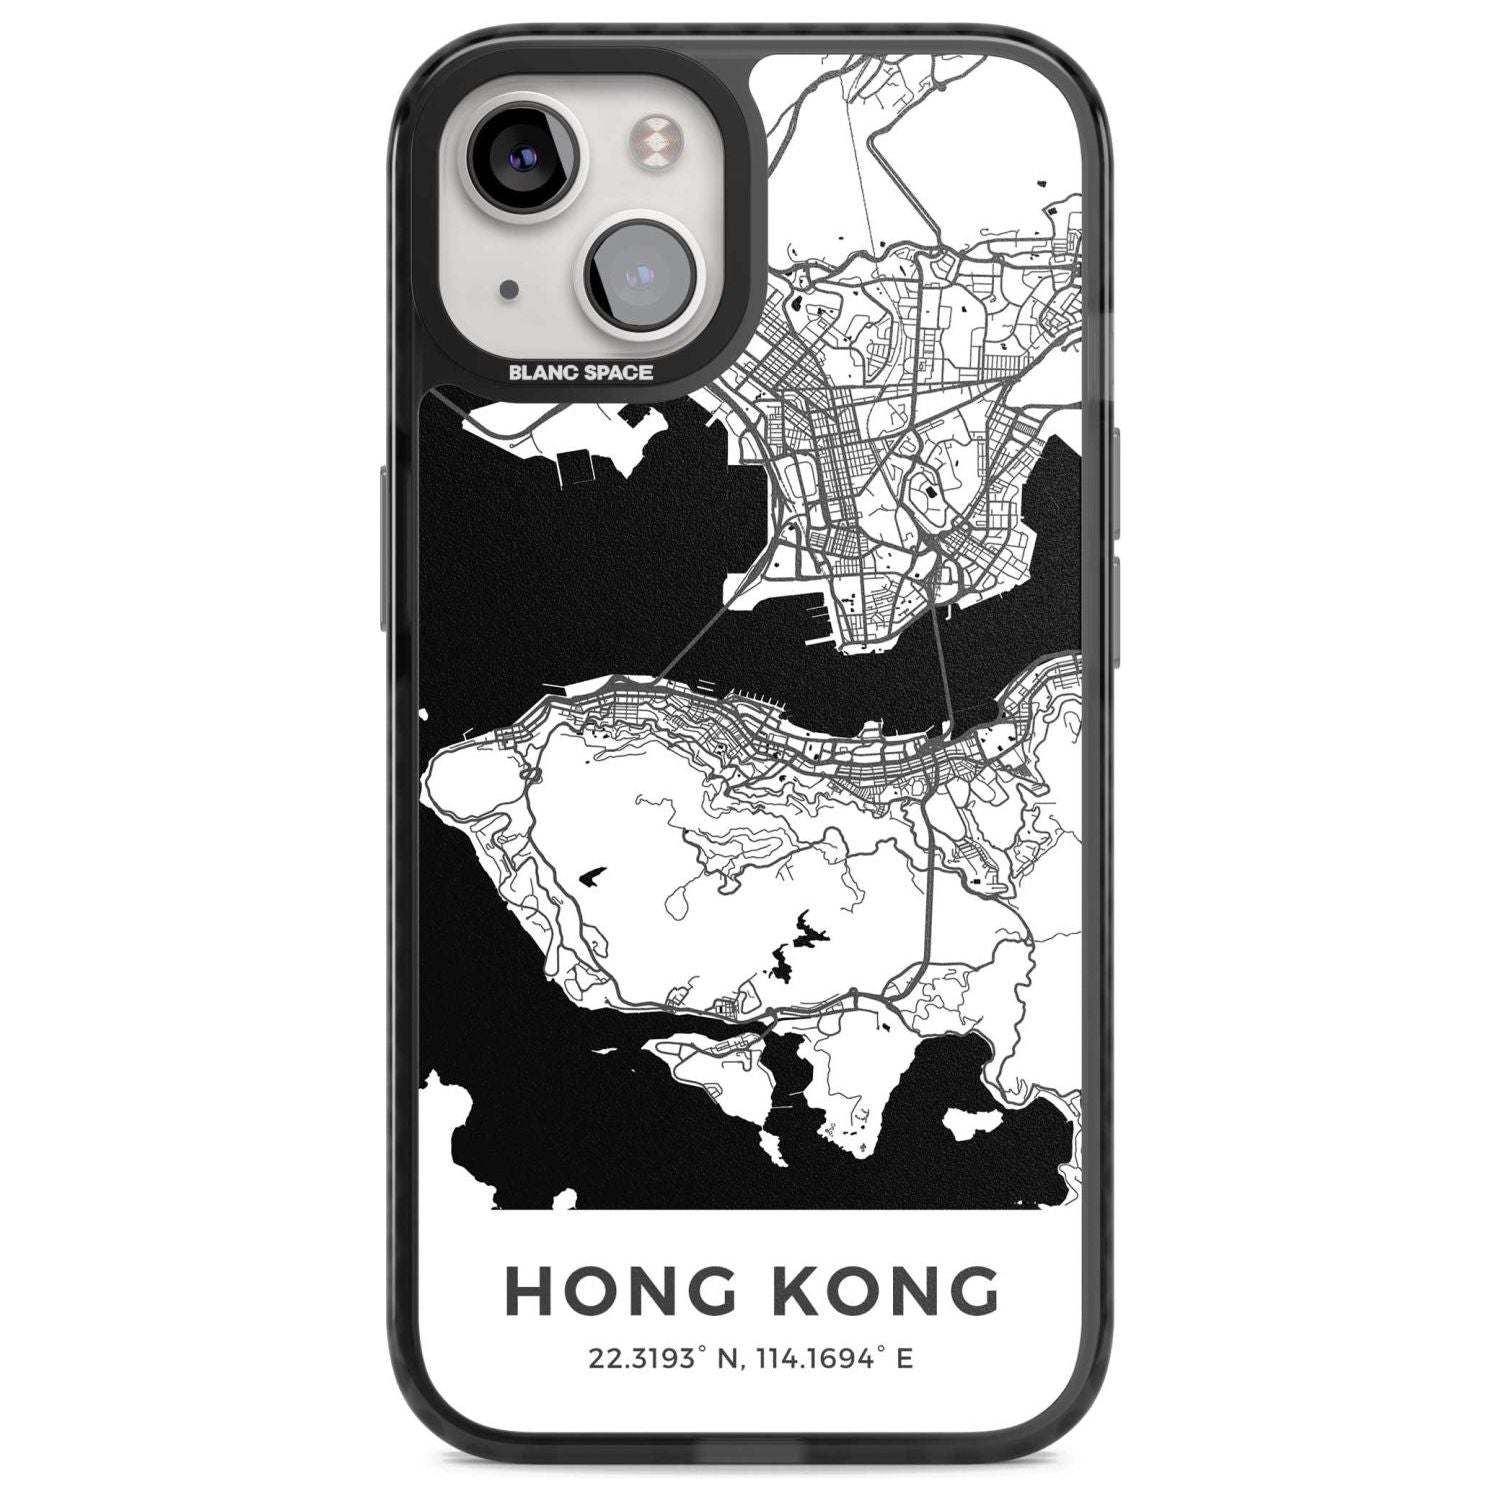 Map of Hong Kong Phone Case iPhone 15 Plus / Magsafe Black Impact Case,iPhone 15 / Magsafe Black Impact Case,iPhone 14 Plus / Magsafe Black Impact Case,iPhone 14 / Magsafe Black Impact Case,iPhone 13 / Magsafe Black Impact Case Blanc Space